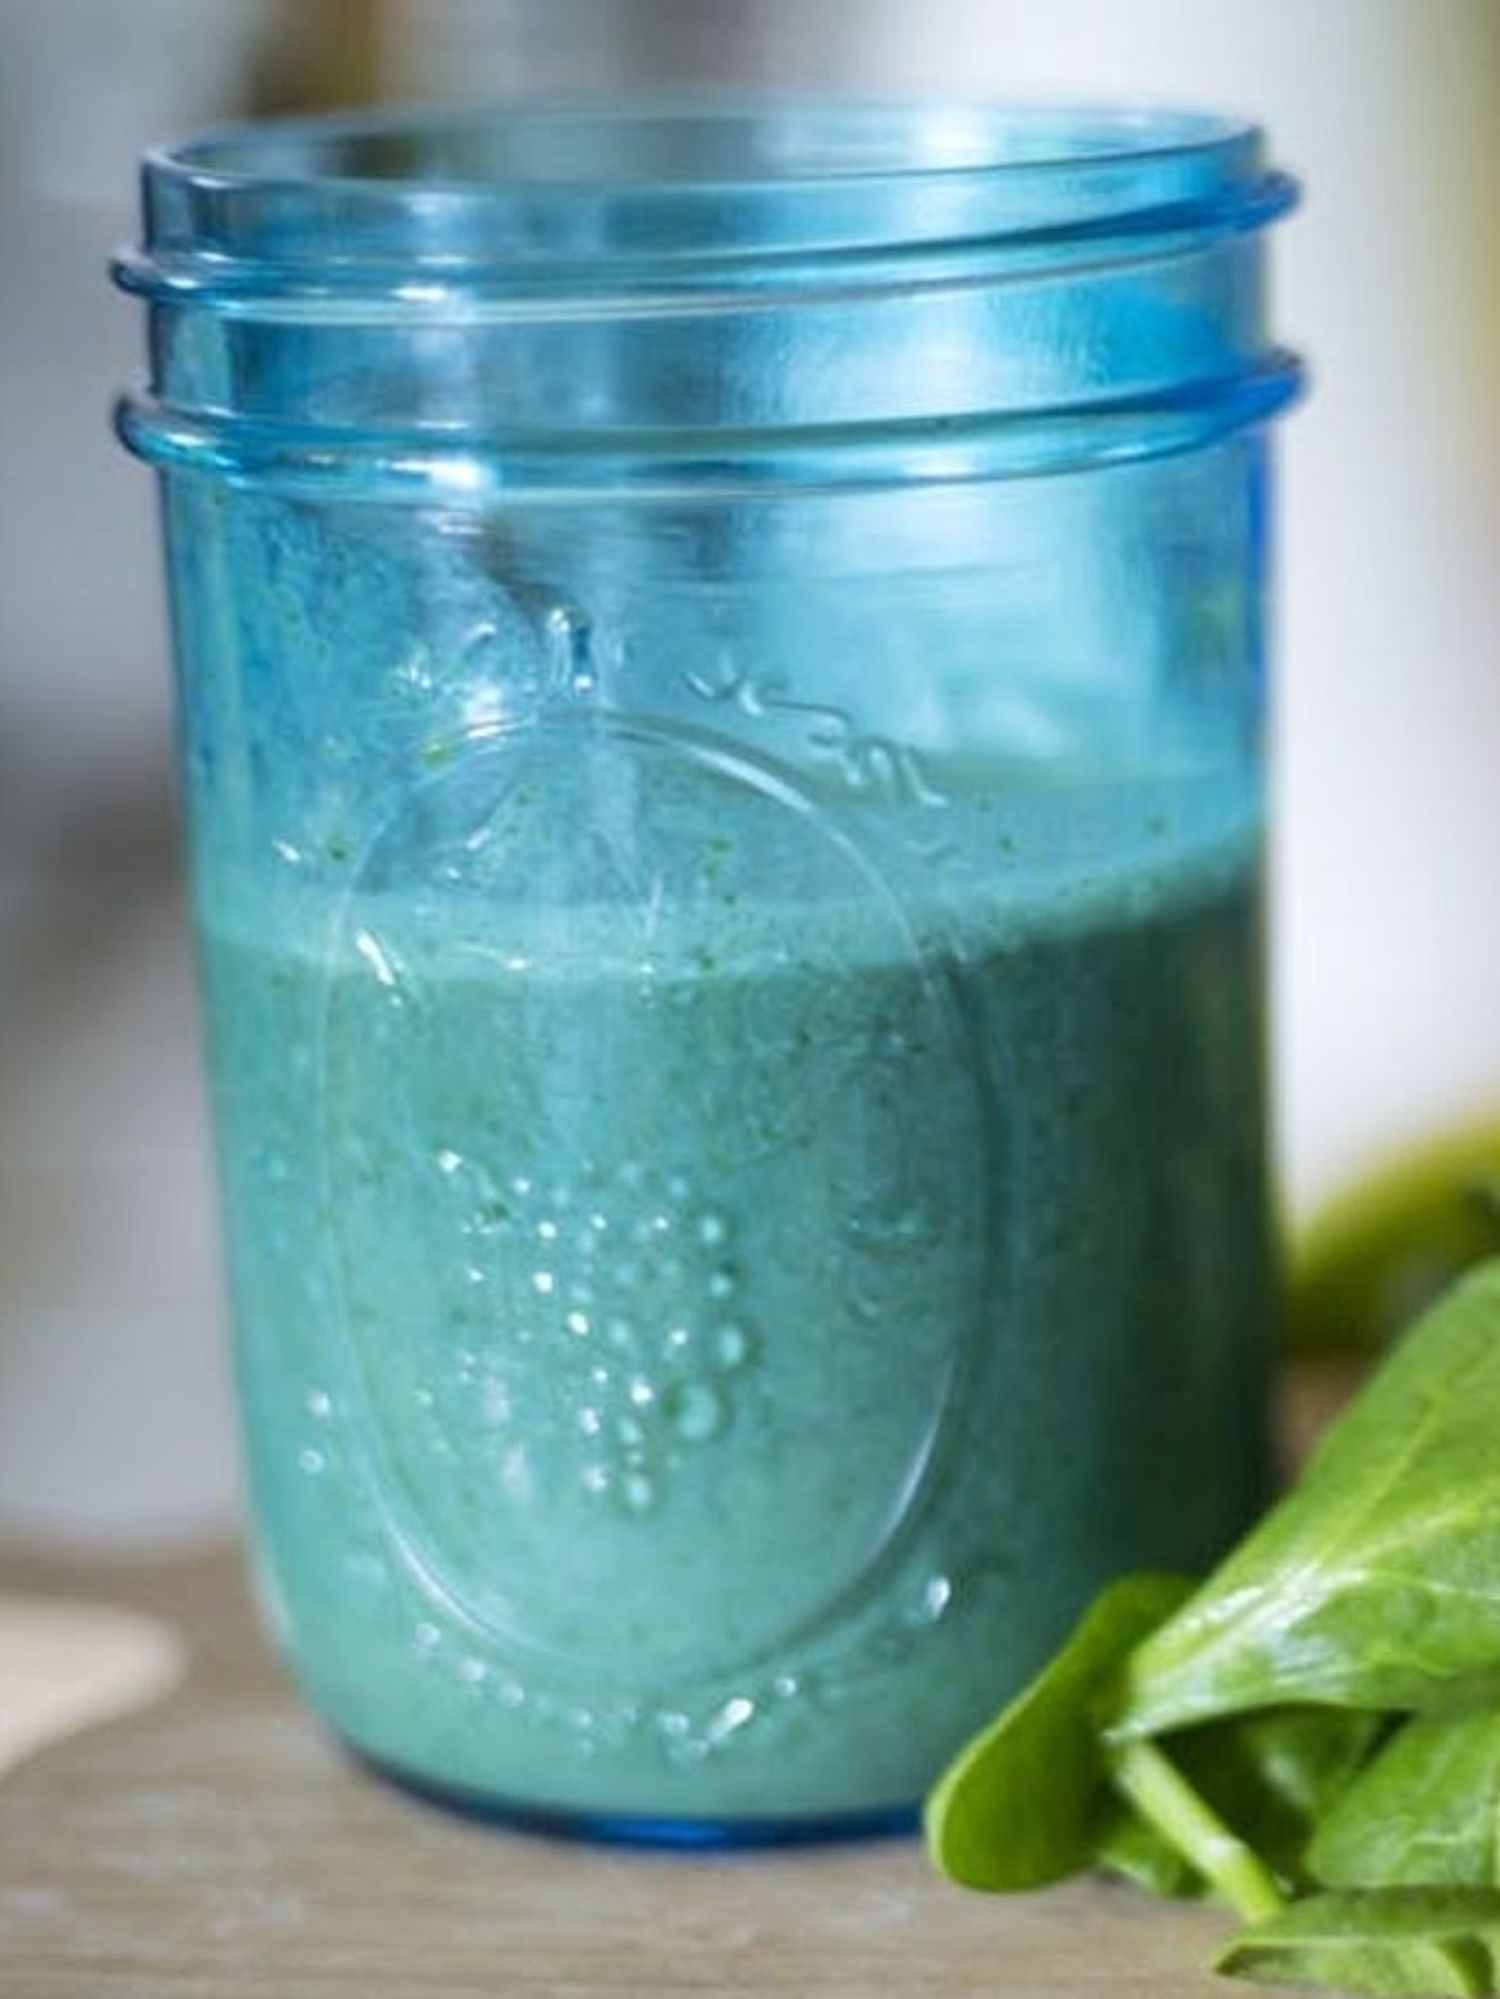 Easy Green Smoothie